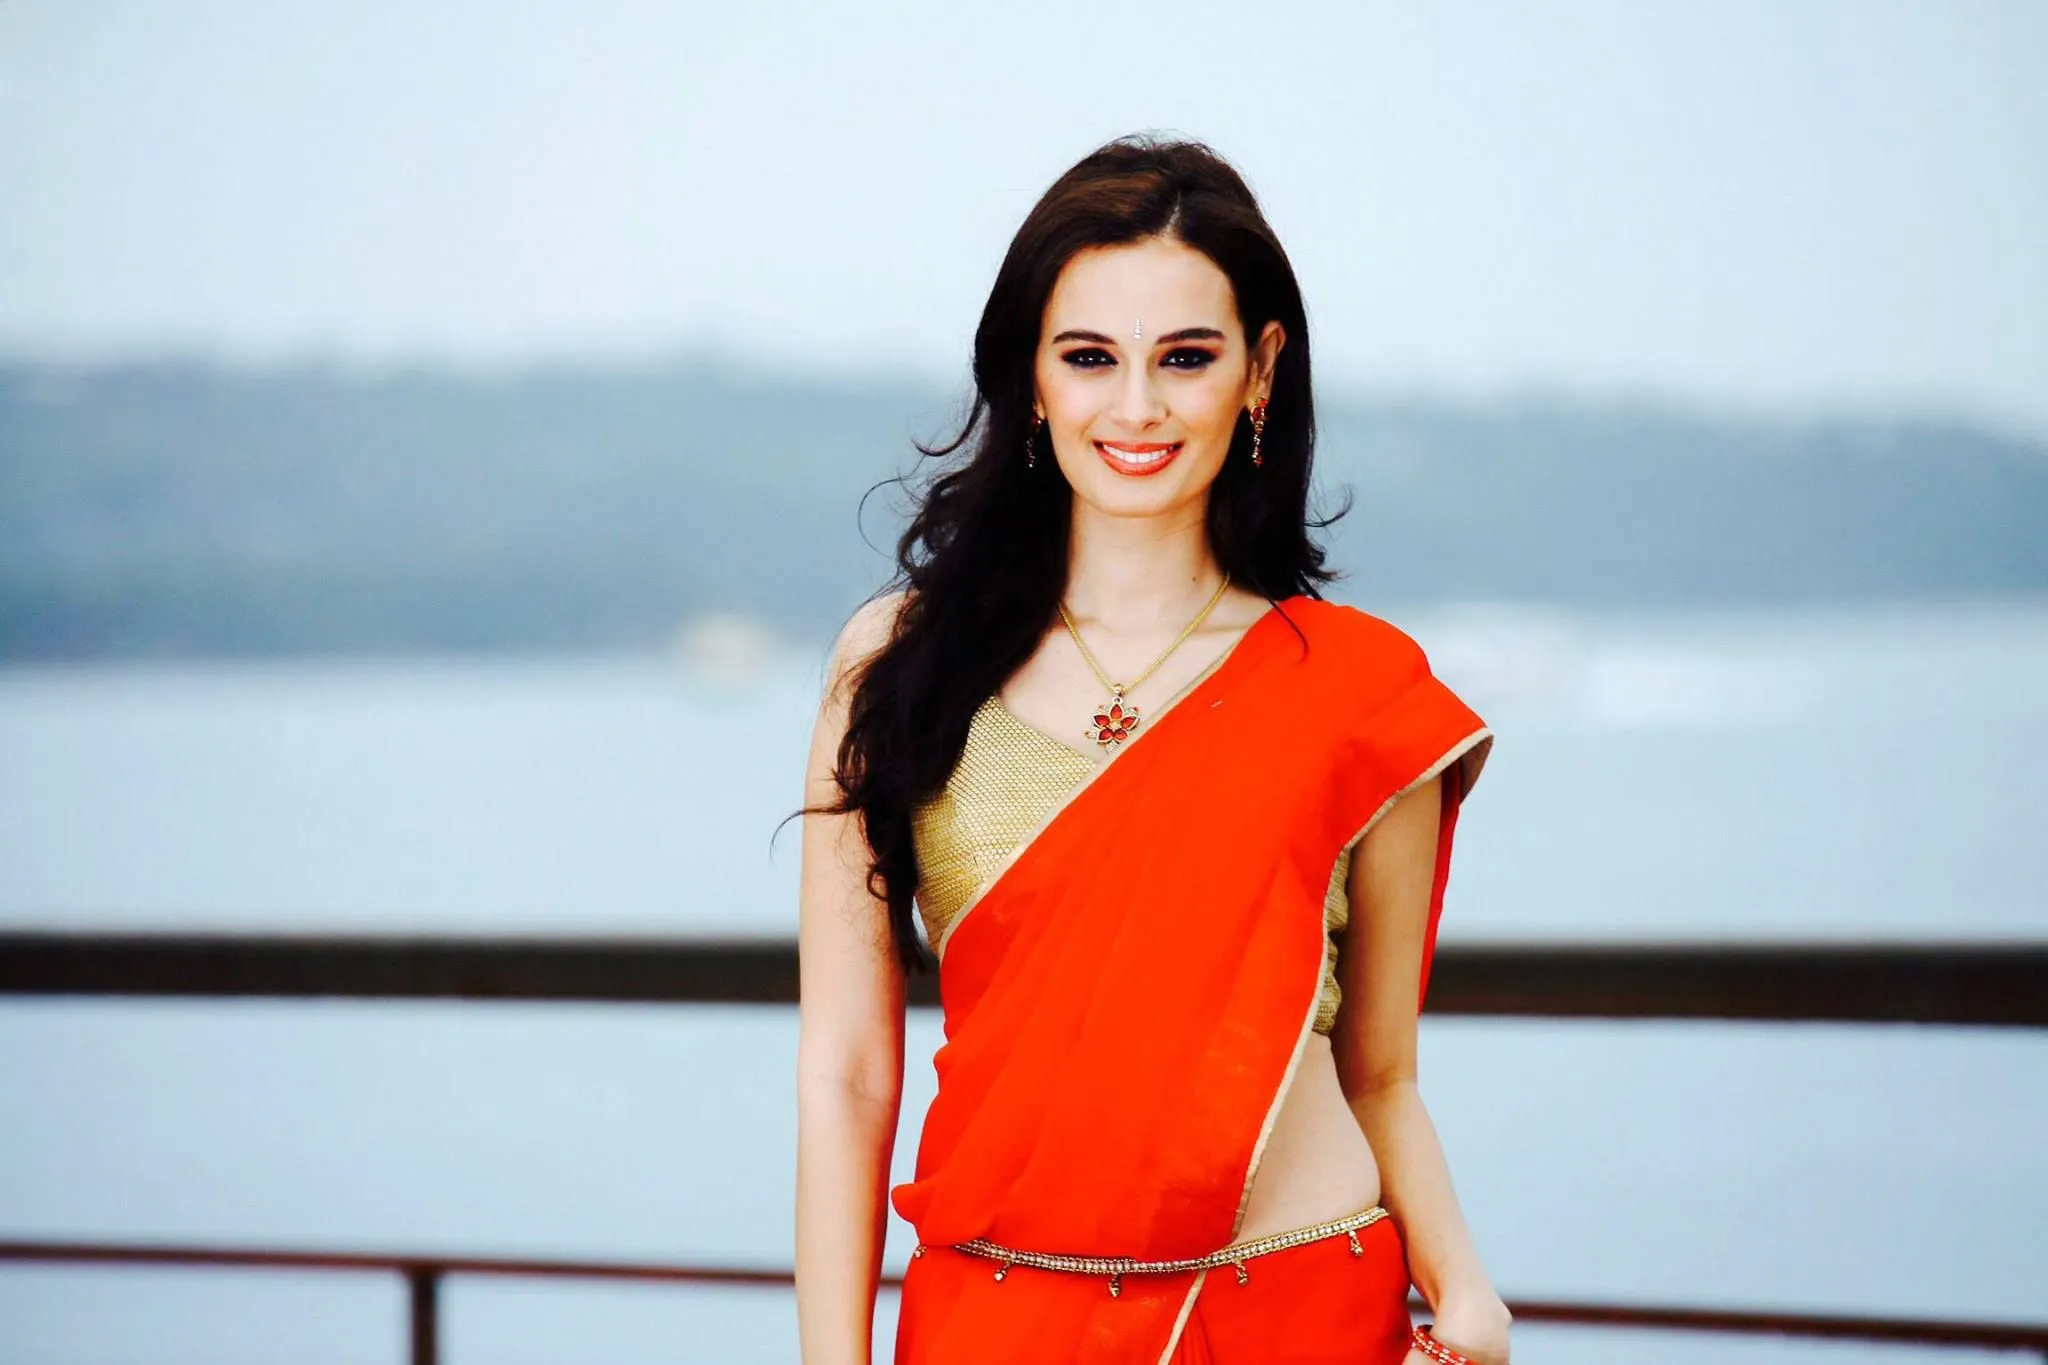 Evelyn sharma Hot Look In Short Cloths Pictures Photoshoots